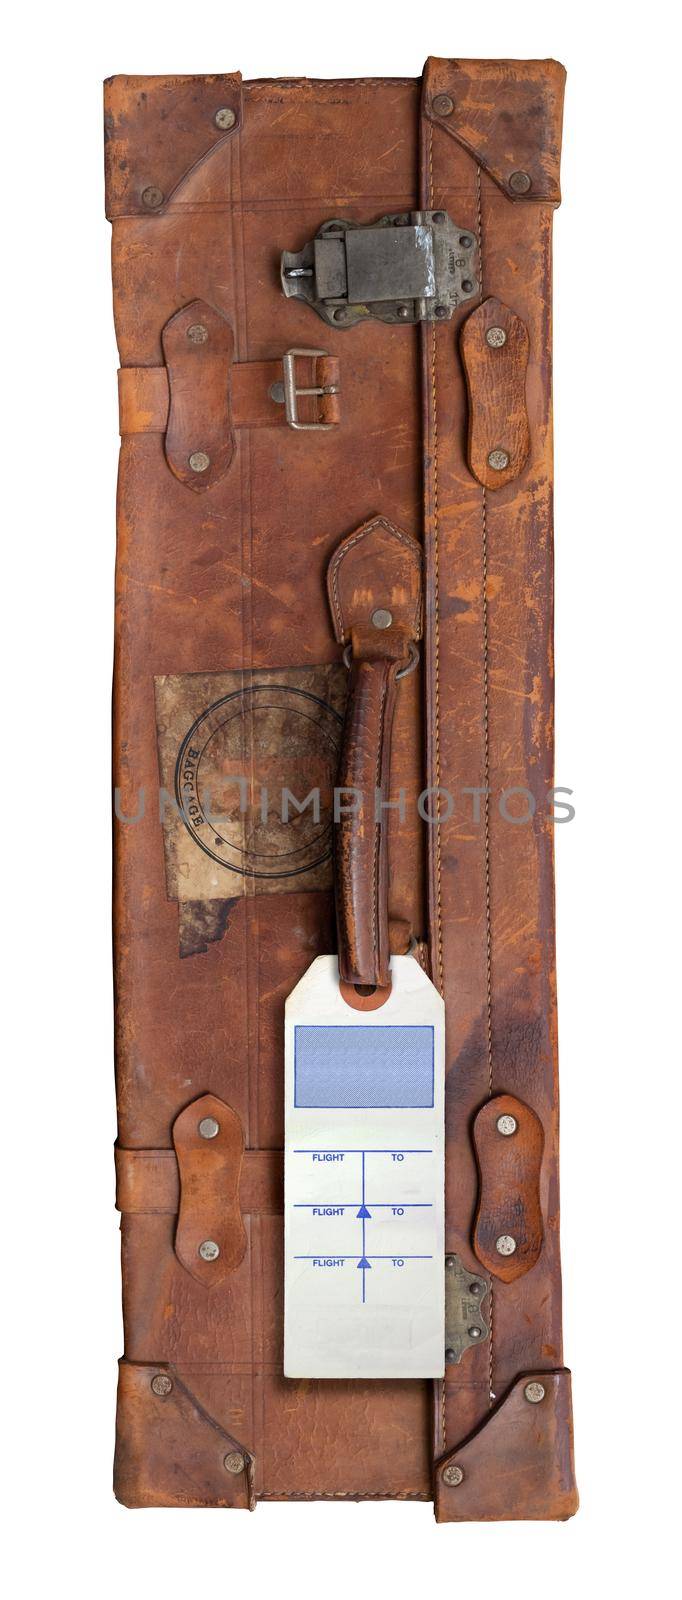 Vintage Suitcase With Blank Luggage Tag by mrdoomits